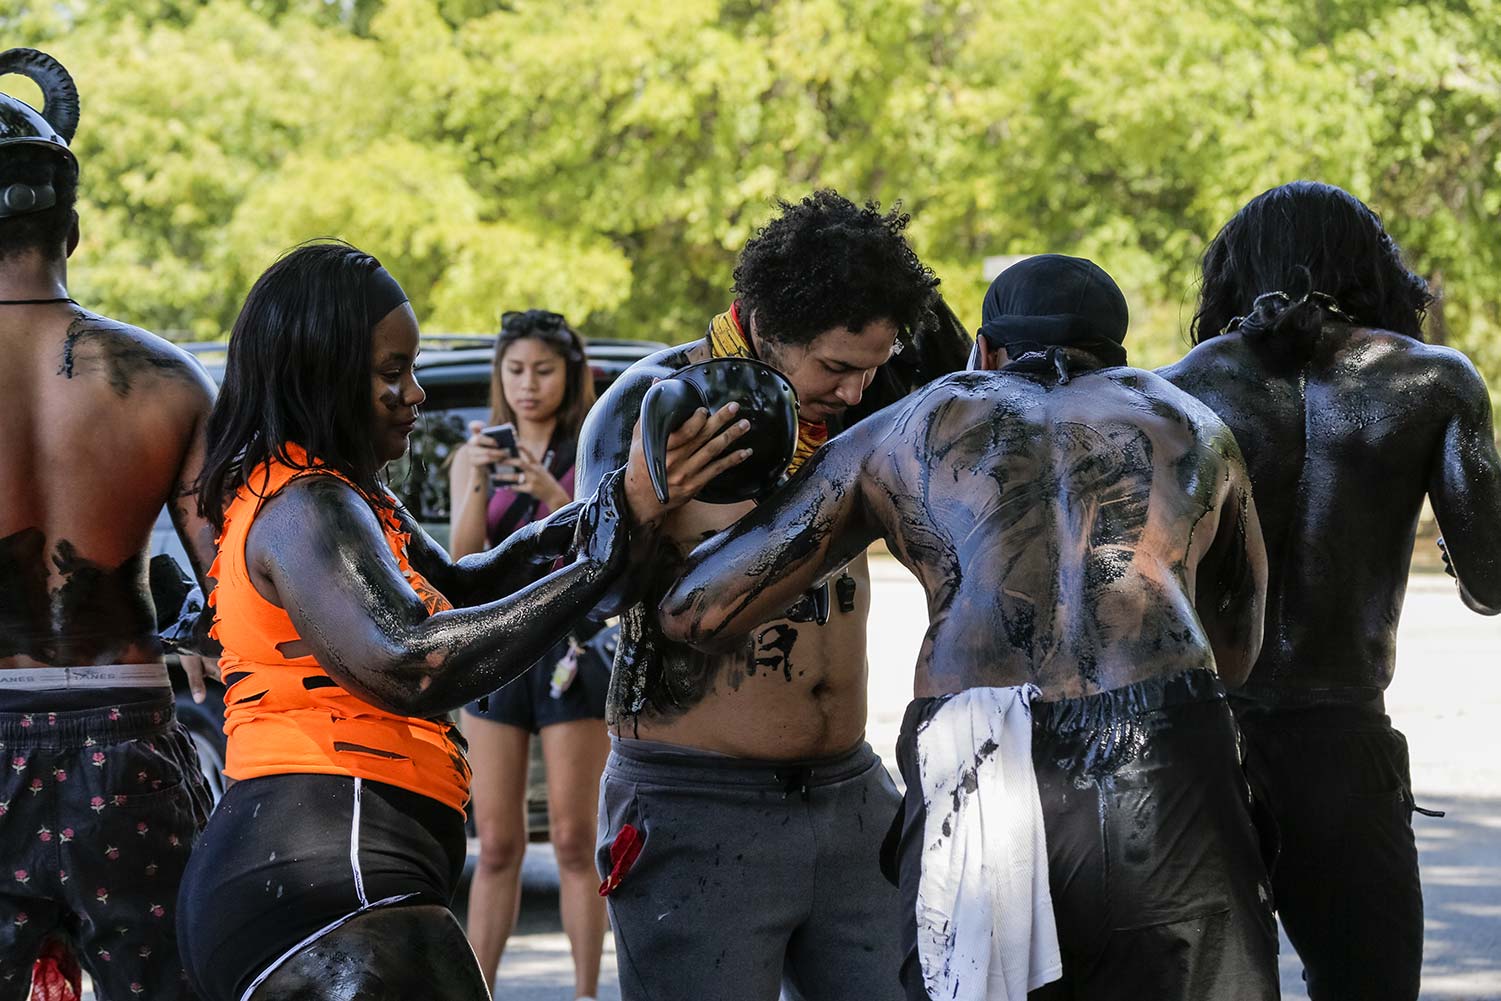 Parade members cover each other in oil as part of tradition.